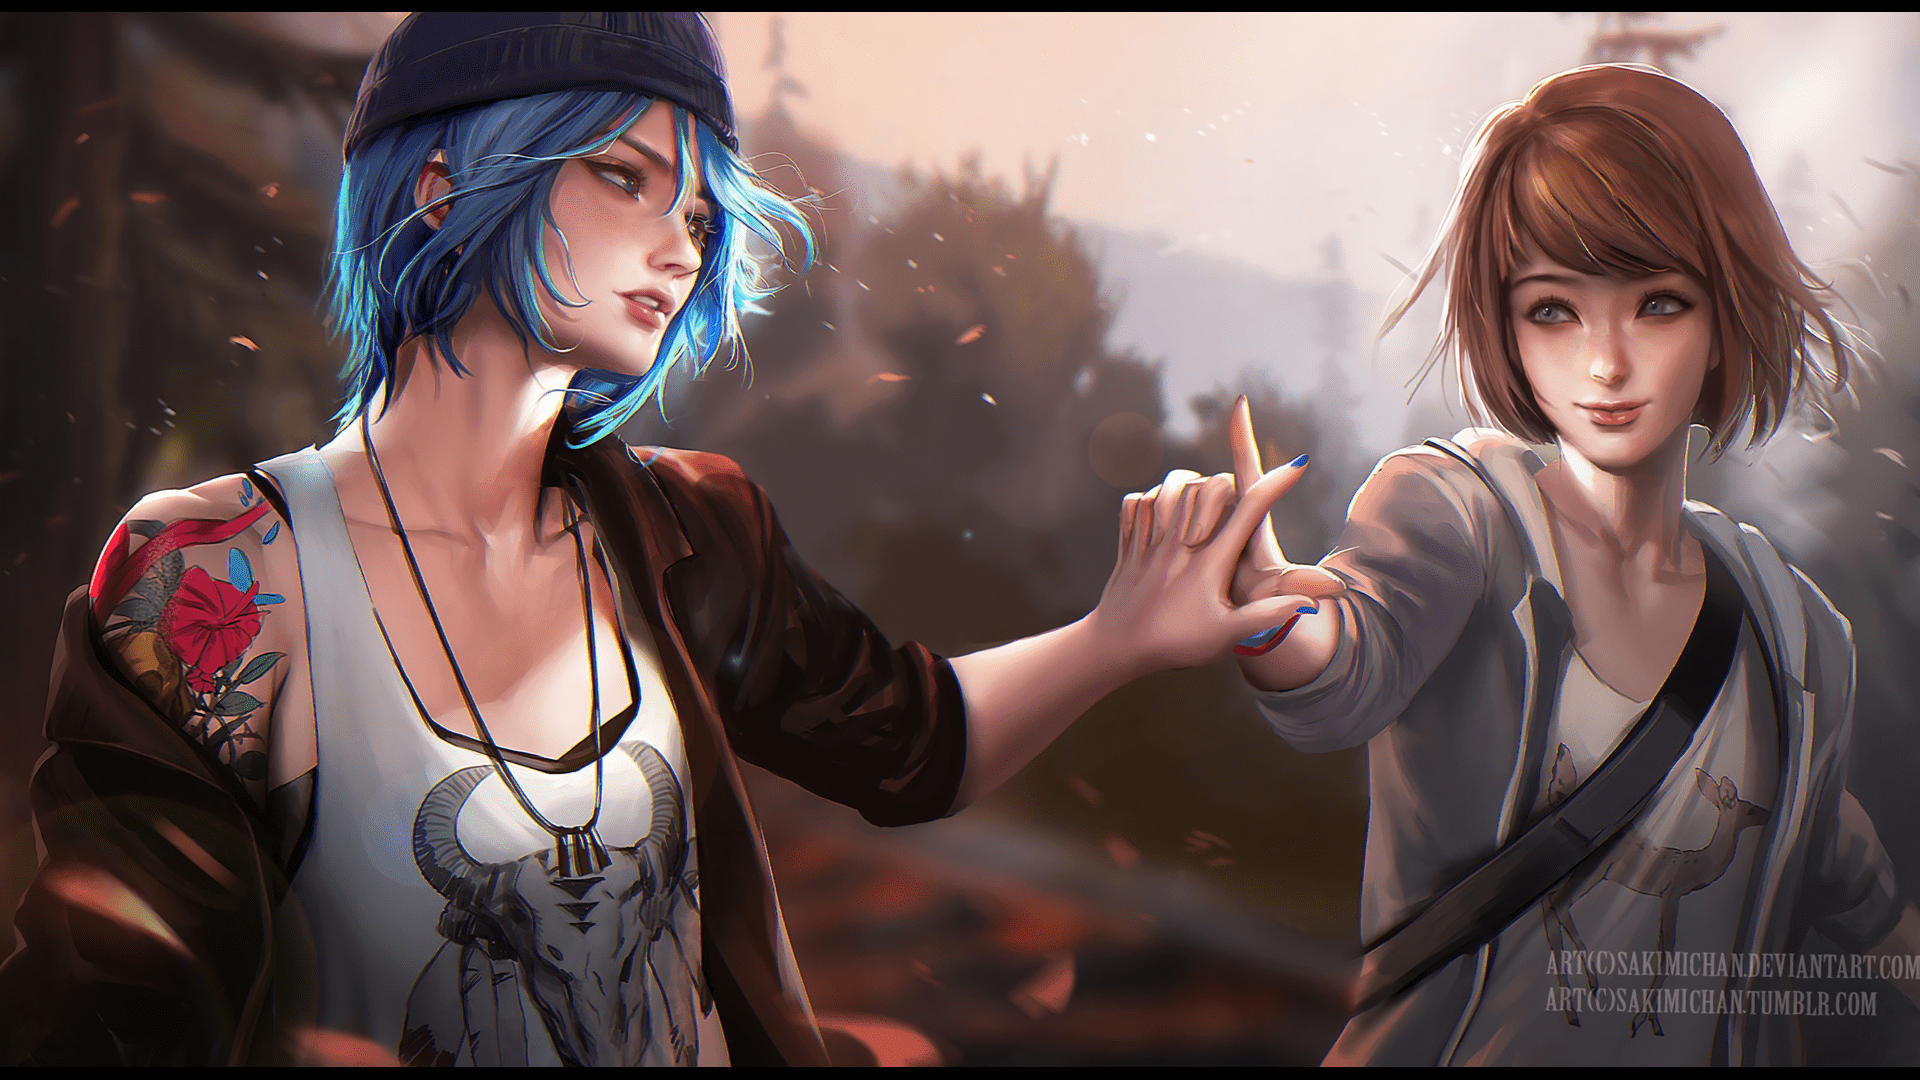 Life Is Strange Wallpapers Top Free Life Is Strange Backgrounds Wallpaperaccess